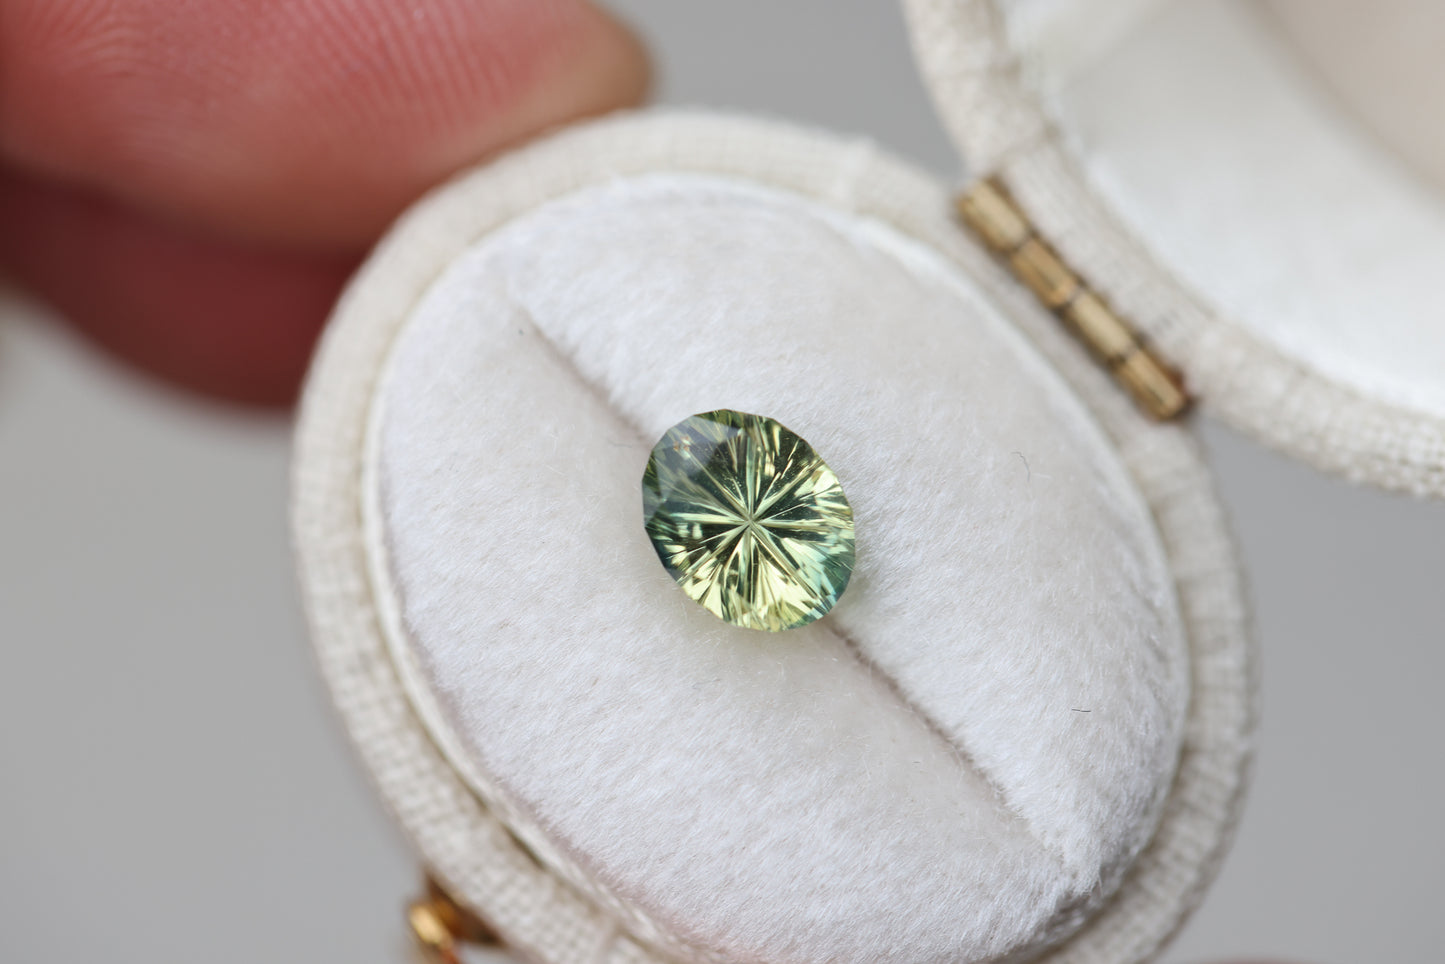 1.49ct oval yellow green sapphire - Starbrite cut by John Dyer